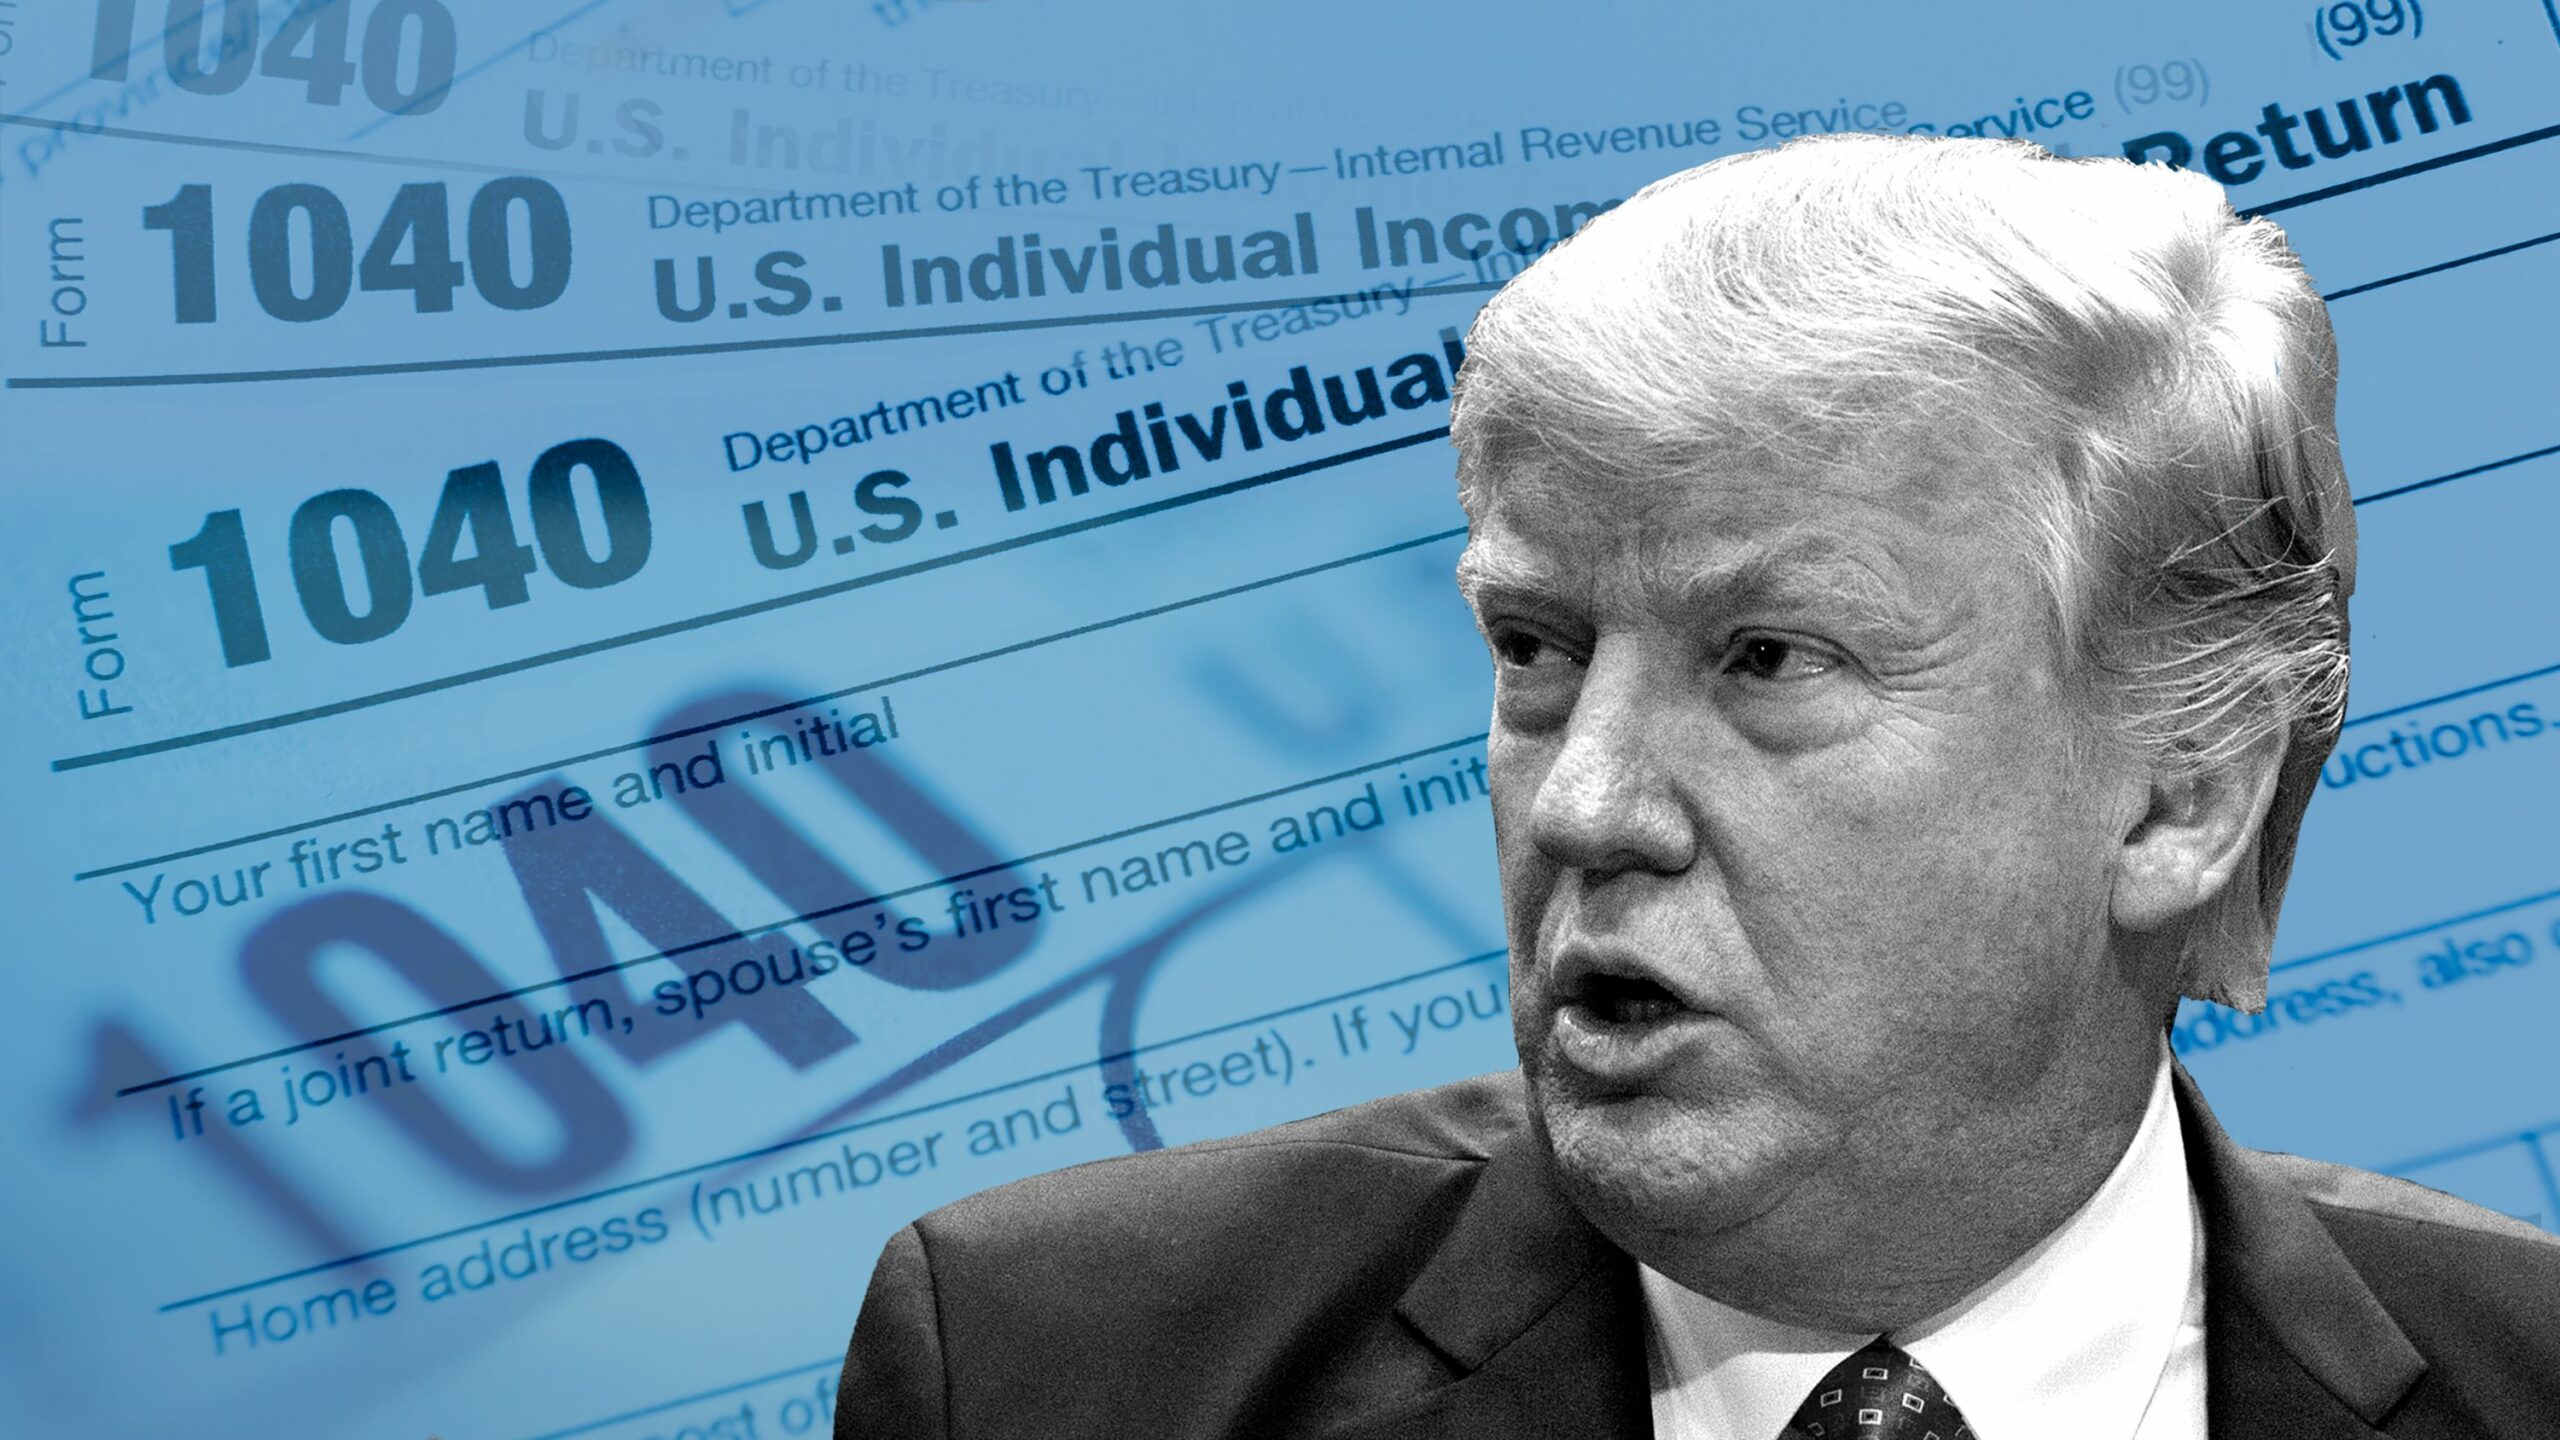 Trump's Tax Returns Are Exposed, Leaving Democrats To Handle The Situation (CNN)